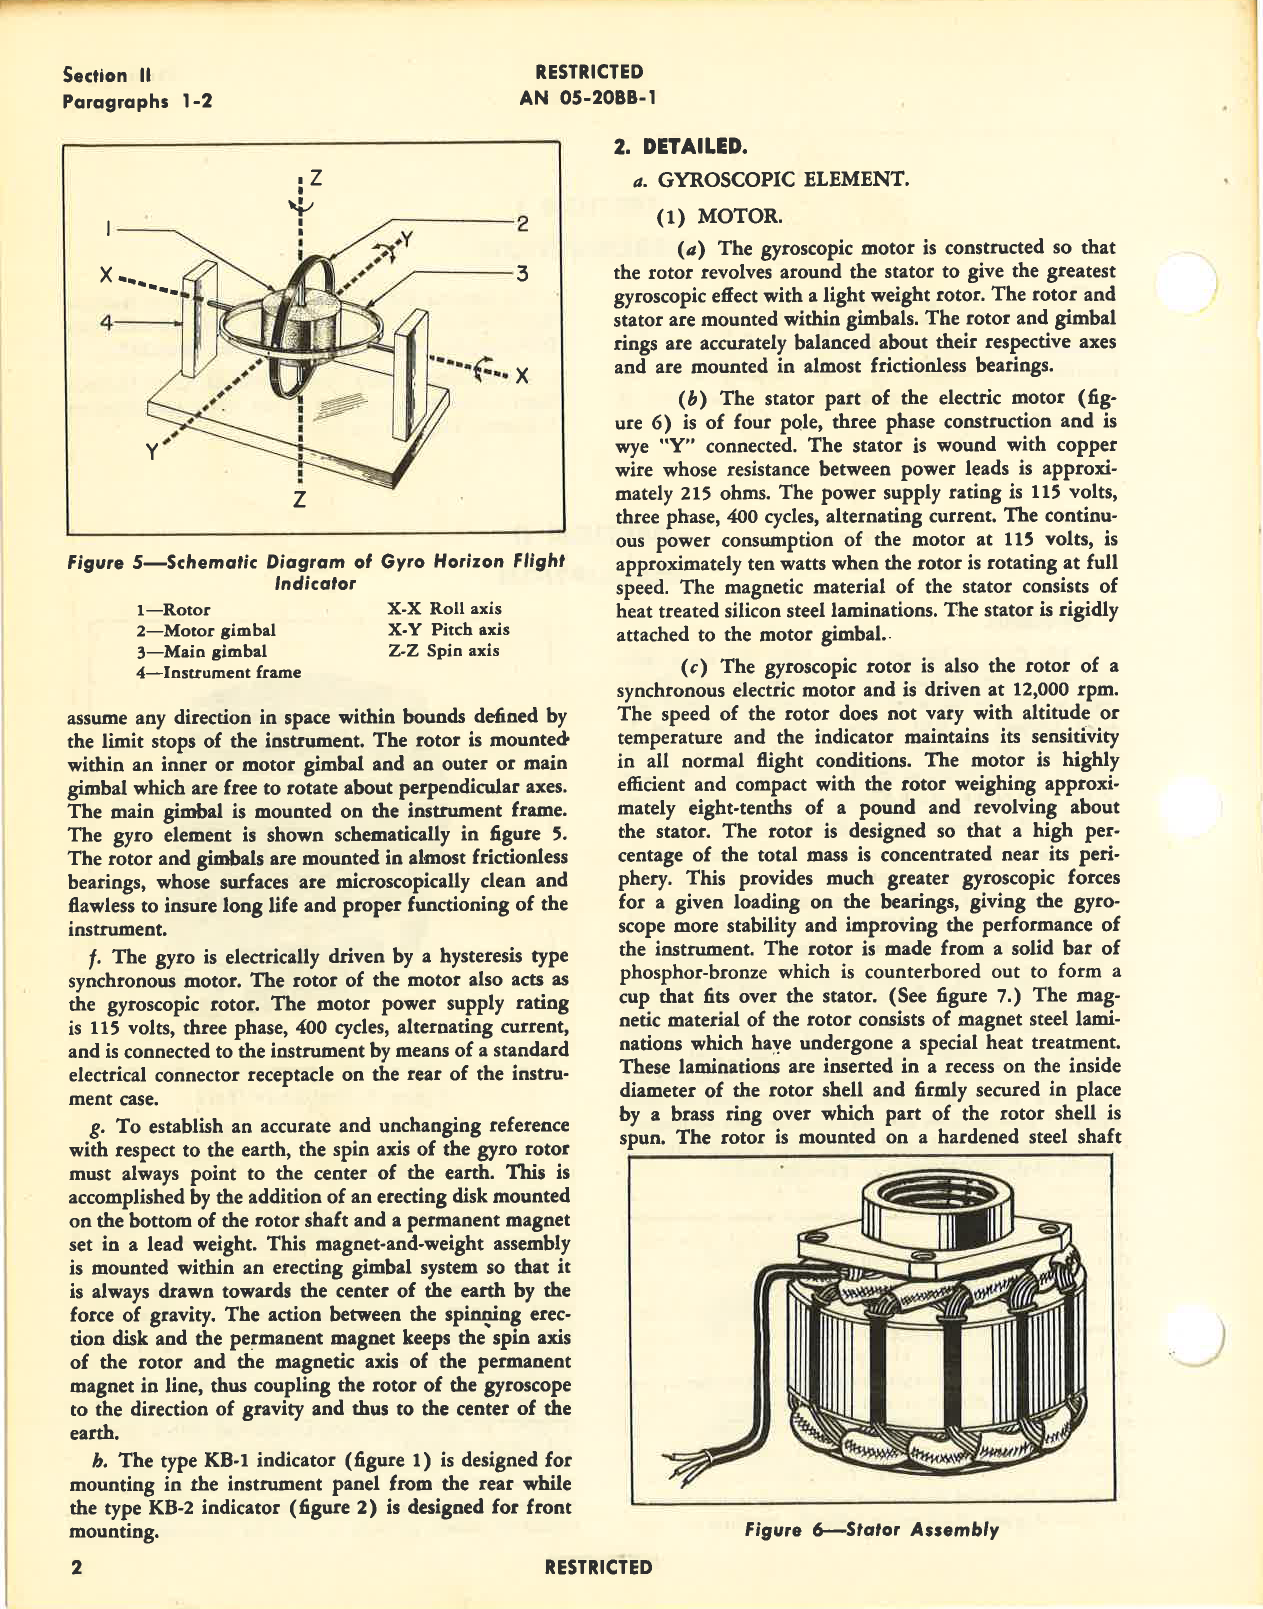 Sample page 6 from AirCorps Library document: Handbook of Instructions with Parts Catalog for Gyro Horizon Indicator Type E-1, F.S.S.C. 88-I-1357